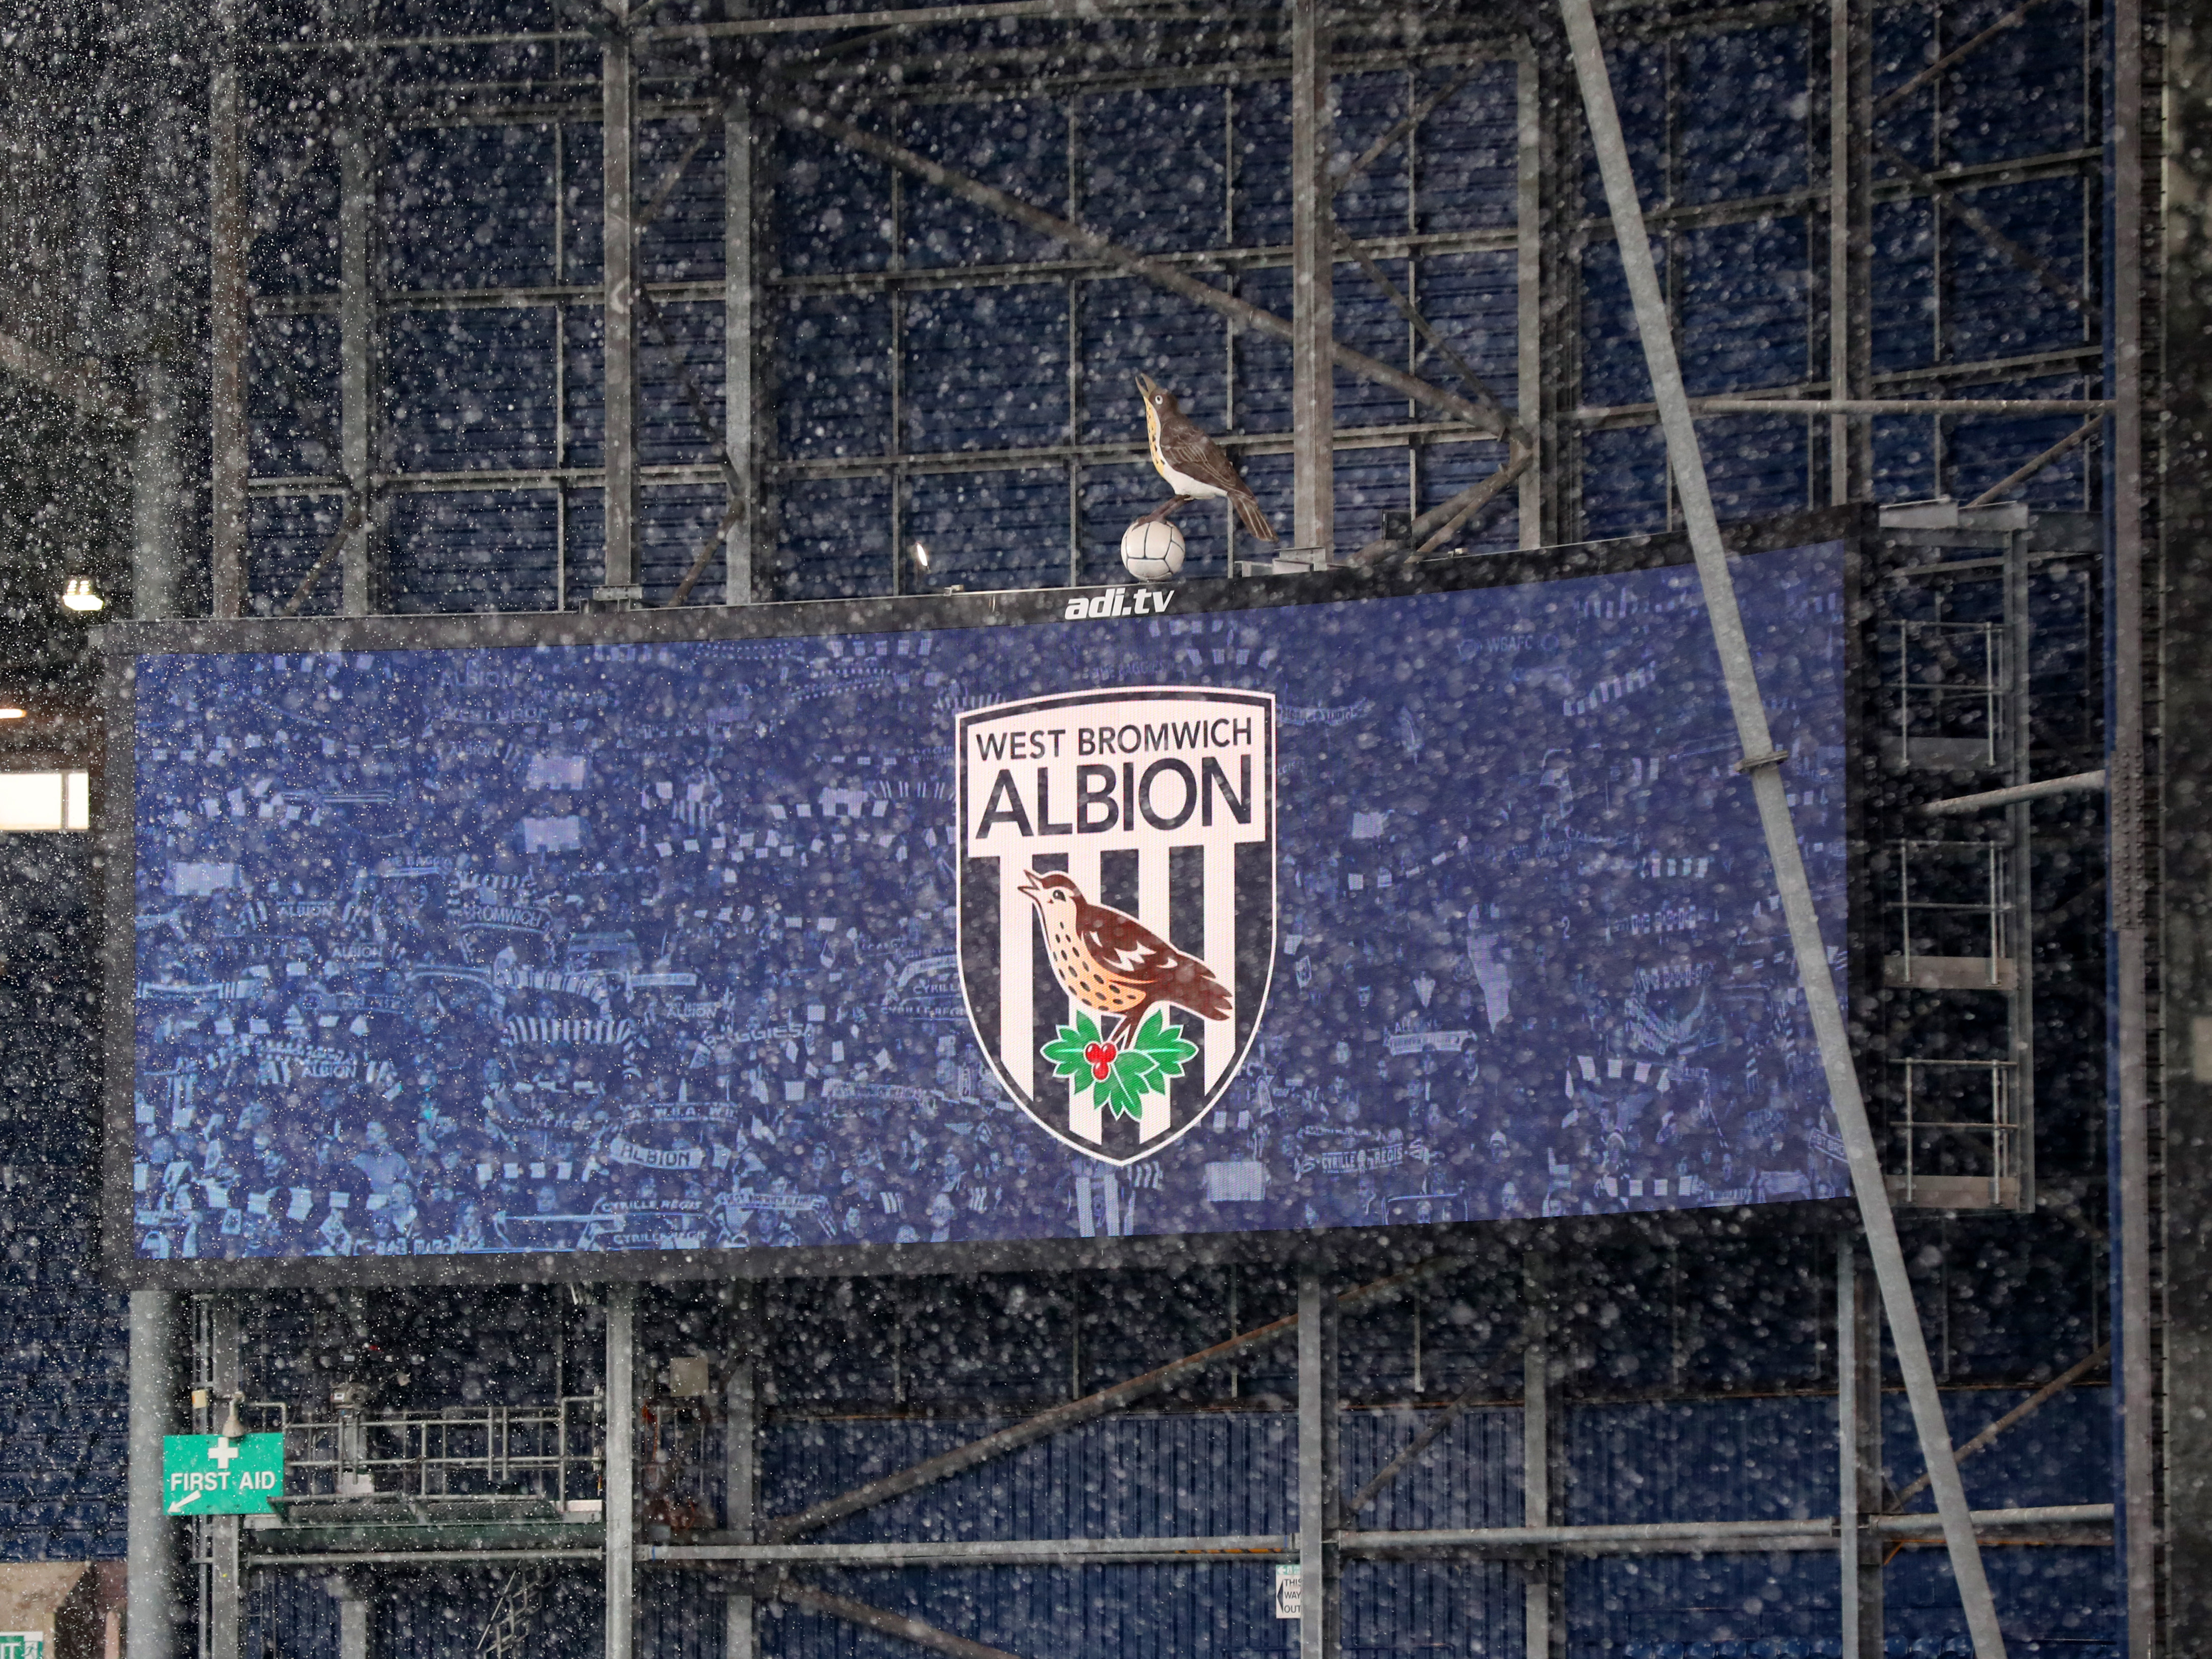 snow falling at The Hawthorns in front of an image of the big screen at the stadium